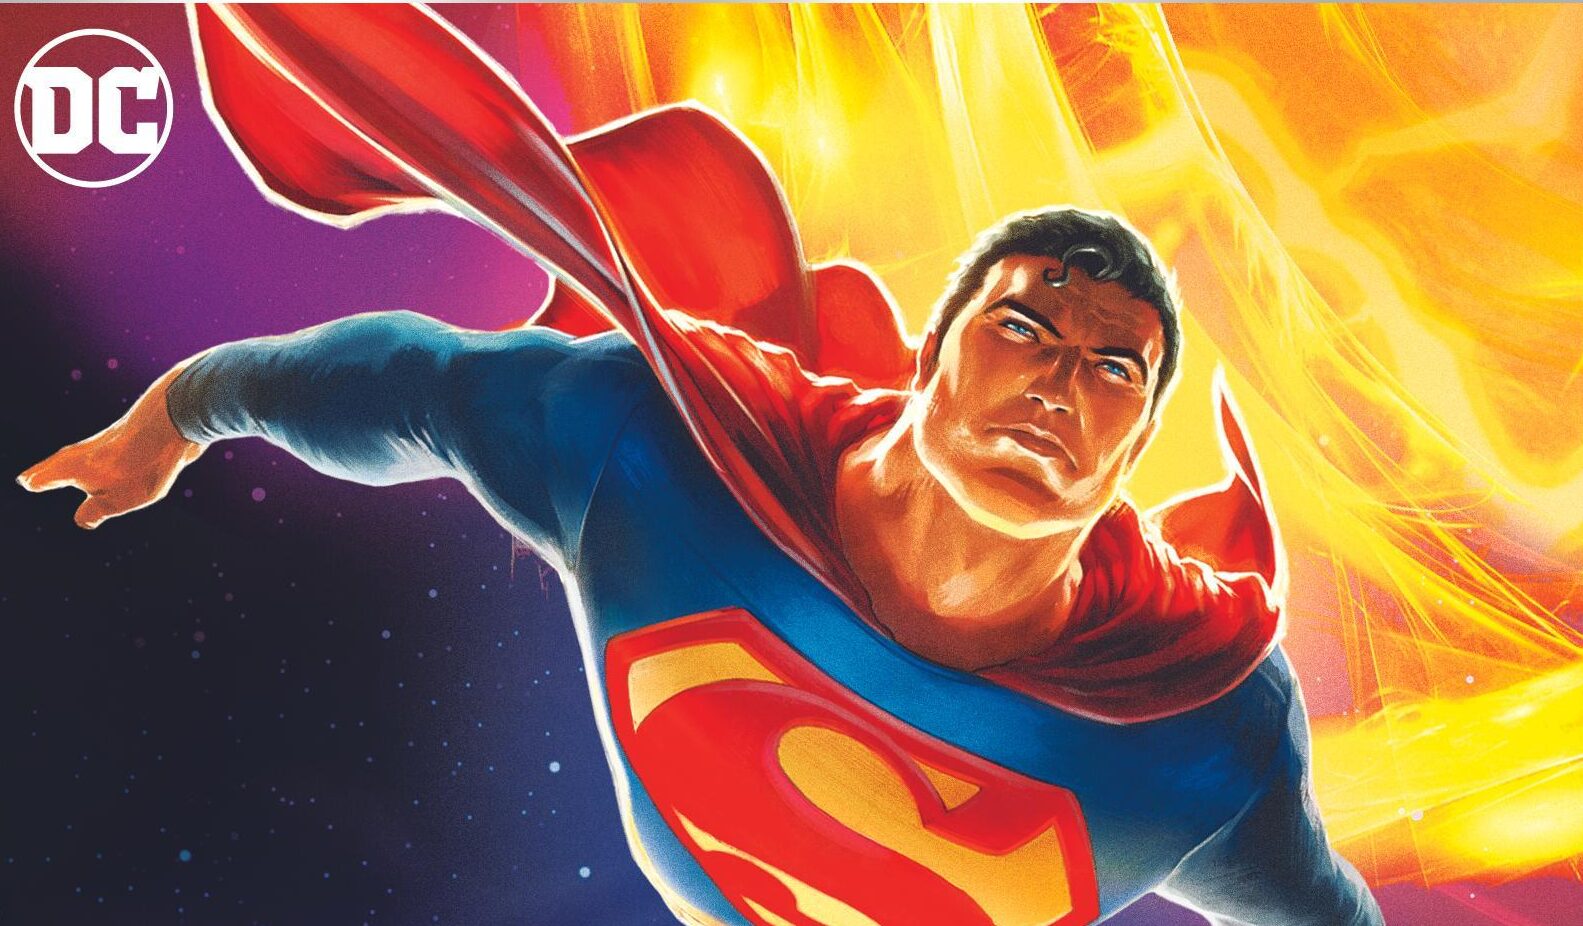 Superman: Legacy and now writer/director James Gunn describes what he wants in the new Superman actor.